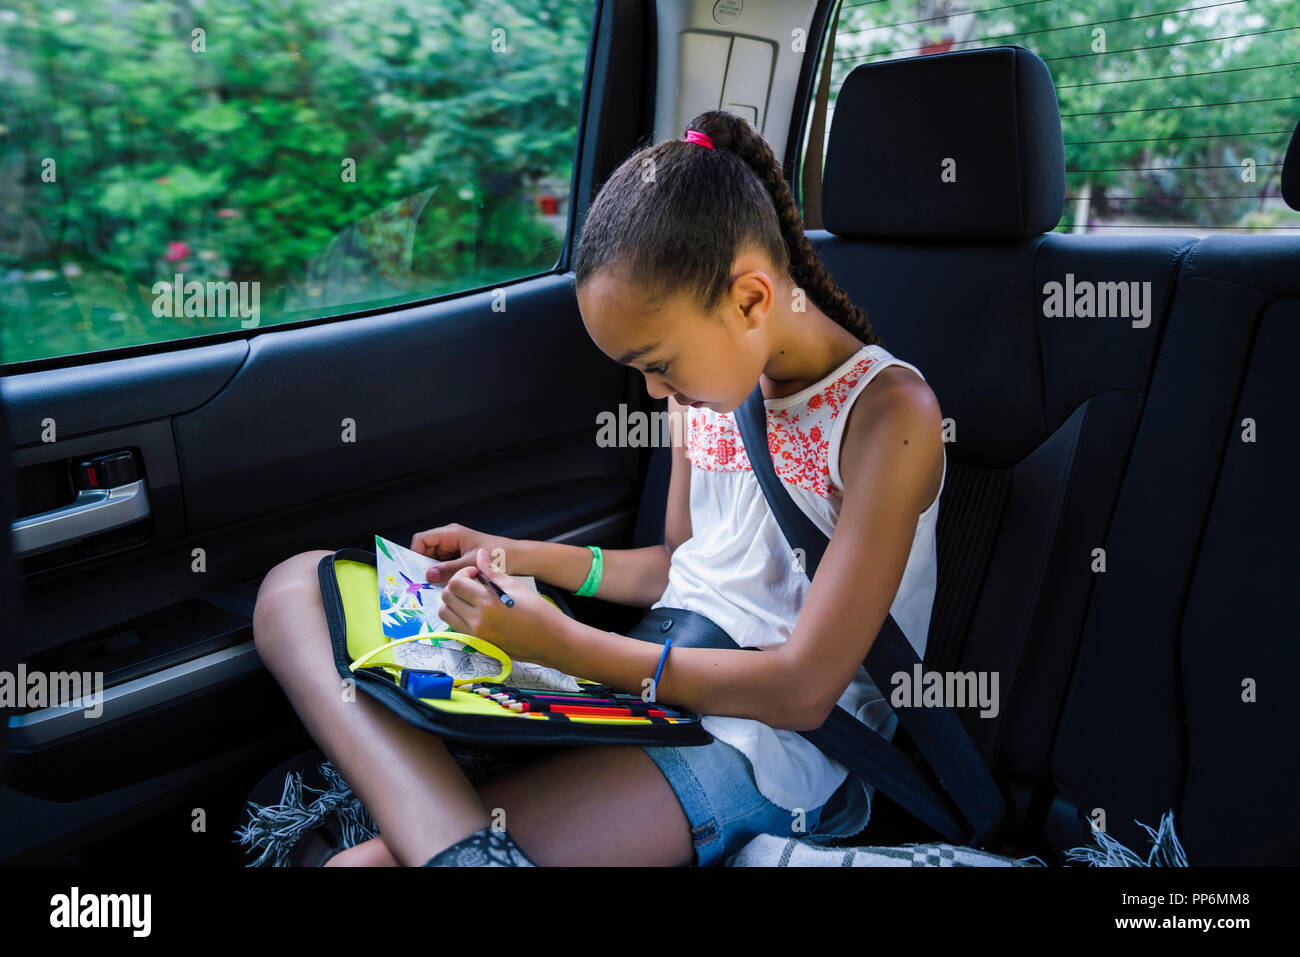 Girl drawing with colored pencils in back seat of car Stock Photo